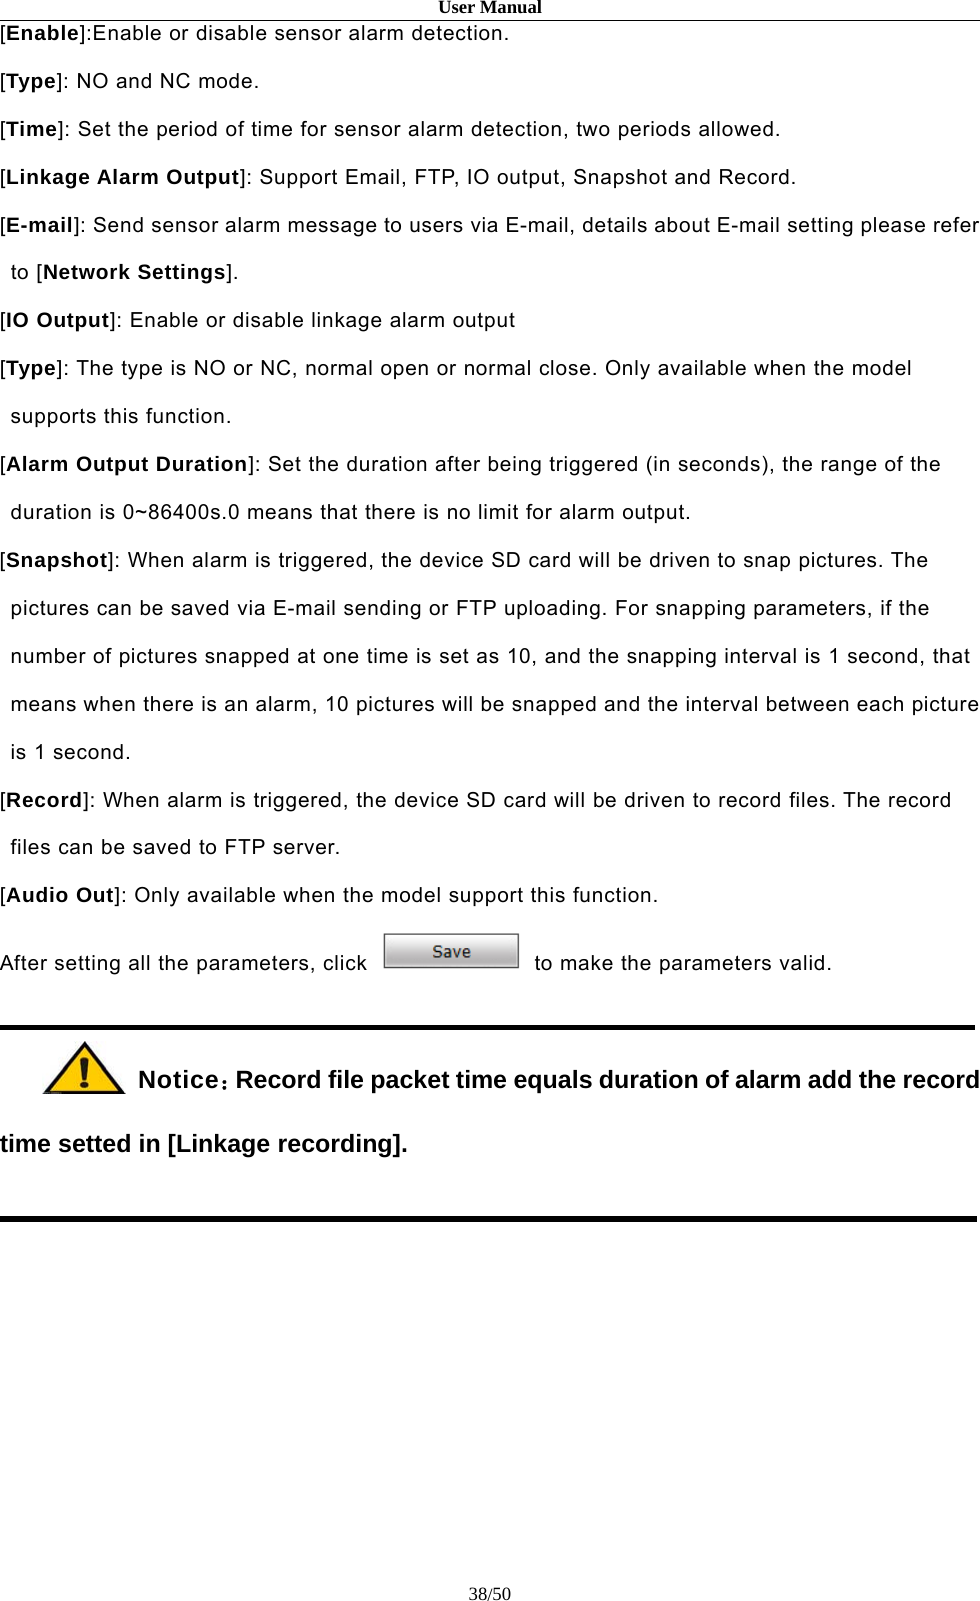 User Manual38/50[Enable]:Enable or disable sensor alarm detection.[Type]: NO and NC mode.[Time]: Set the period of time for sensor alarm detection, two periods allowed.[Linkage Alarm Output]: Support Email, FTP, IO output, Snapshot and Record.[E-mail]: Send sensor alarm message to users via E-mail, details about E-mail setting please referto [Network Settings].[IO Output]: Enable or disable linkage alarm output[Type]: The type is NO or NC, normal open or normal close. Only available when the modelsupports this function.[Alarm Output Duration]: Set the duration after being triggered (in seconds), the range of theduration is 0~86400s.0 means that there is no limit for alarm output.[Snapshot]: When alarm is triggered, the device SD card will be driven to snap pictures. Thepictures can be saved via E-mail sending or FTP uploading. For snapping parameters, if thenumber of pictures snapped at one time is set as 10, and the snapping interval is 1 second, thatmeans when there is an alarm, 10 pictures will be snapped and the interval between each pictureis 1 second.[Record]: When alarm is triggered, the device SD card will be driven to record files. The recordfiles can be saved to FTP server.[Audio Out]: Only available when the model support this function.After setting all the parameters, click to make the parameters valid.Notice：Record file packet time equals duration of alarm add the recordtime setted in [Linkage recording].